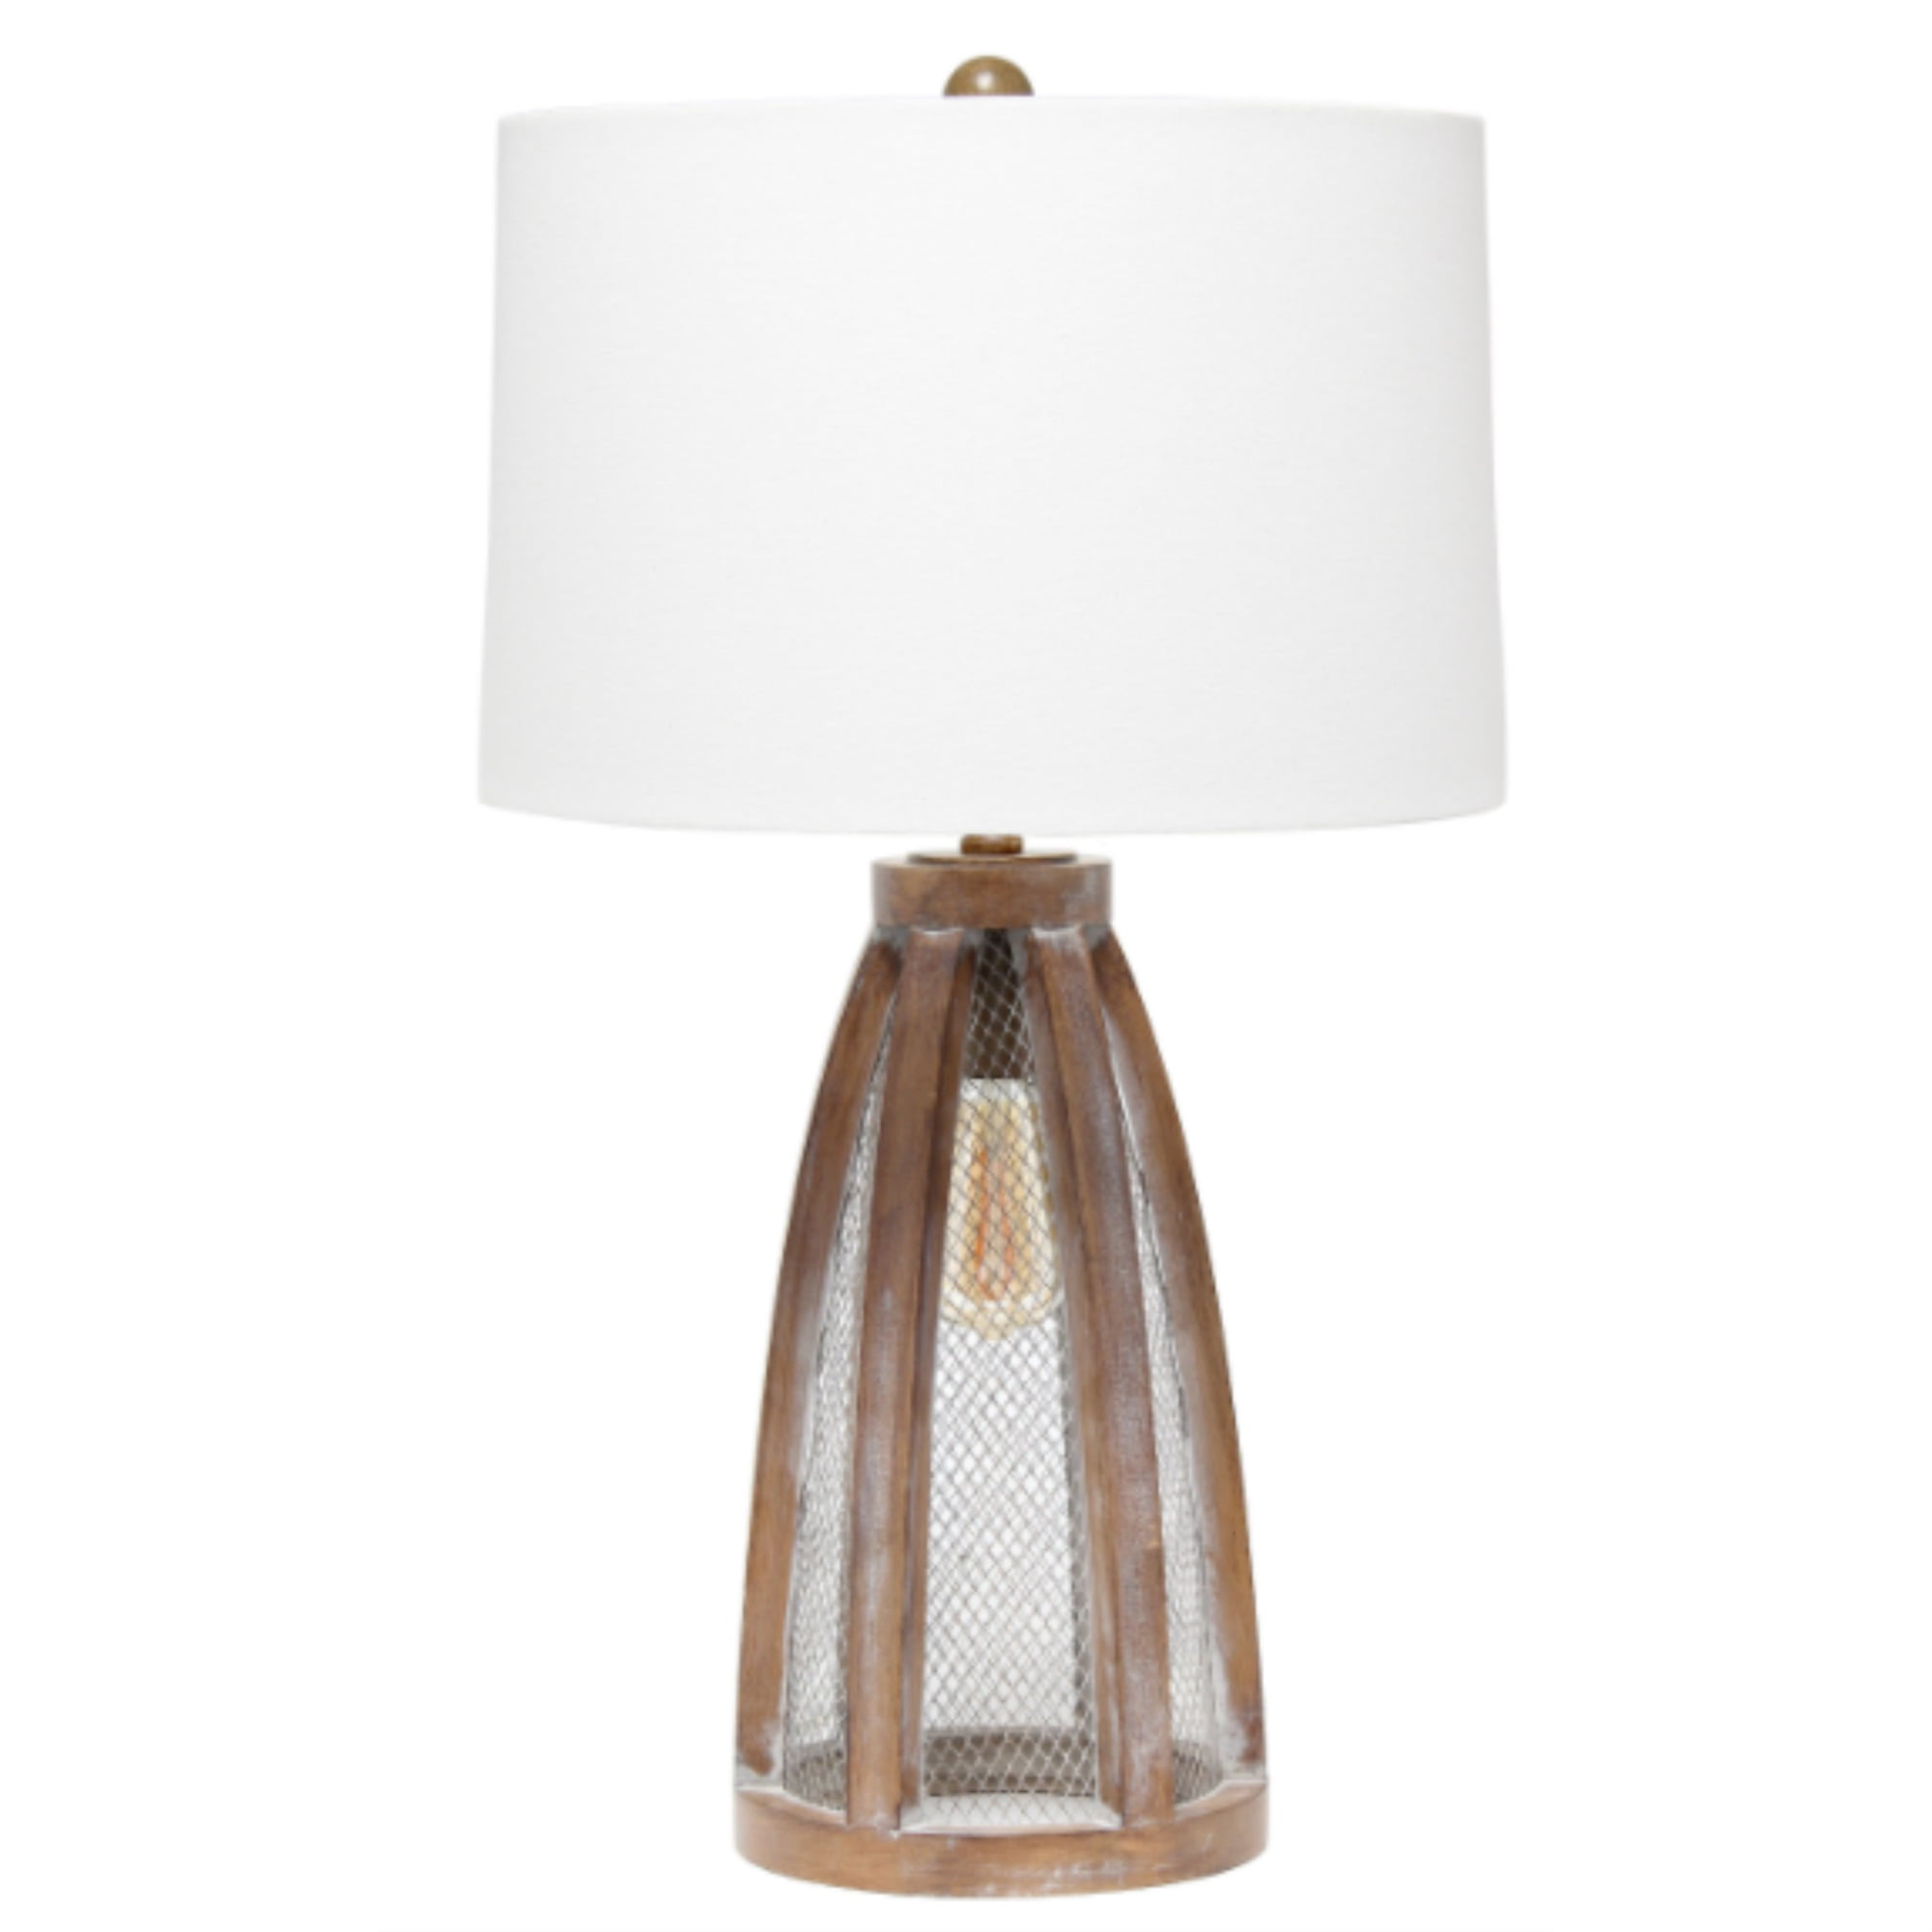  Lalia Home Wooded Arch Farmhouse Table Lamp with White Fabric Shade, Old Wood